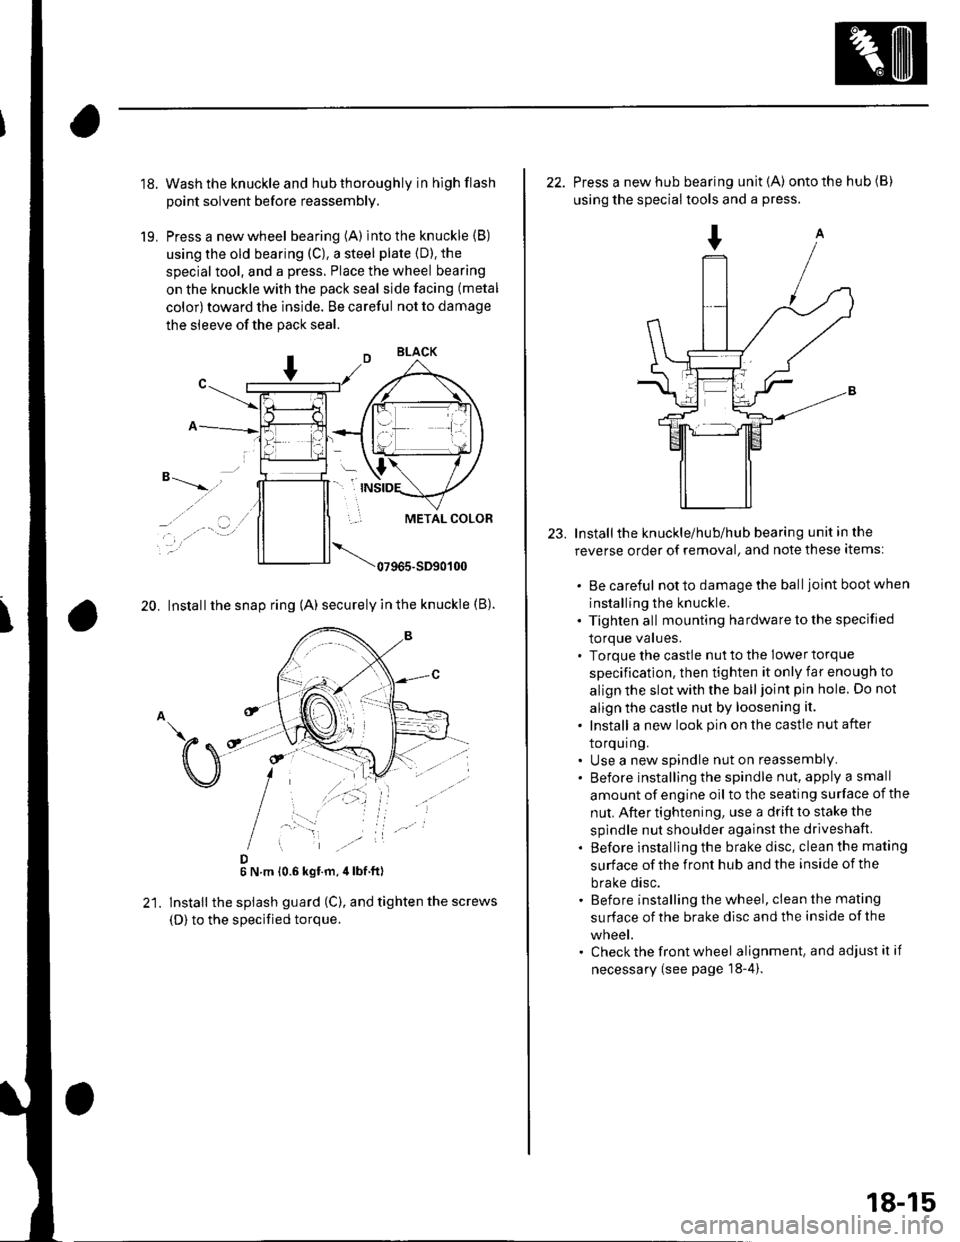 HONDA CIVIC 2003 7.G User Guide 18.
19.
Wash the knuckle and hub thoroughly in hlgh flash
point solvent before reassembly.
Press a new wheel bearing (A) into the knuckle (B)
using the old bearing (C), a steel plate {D). the
special 